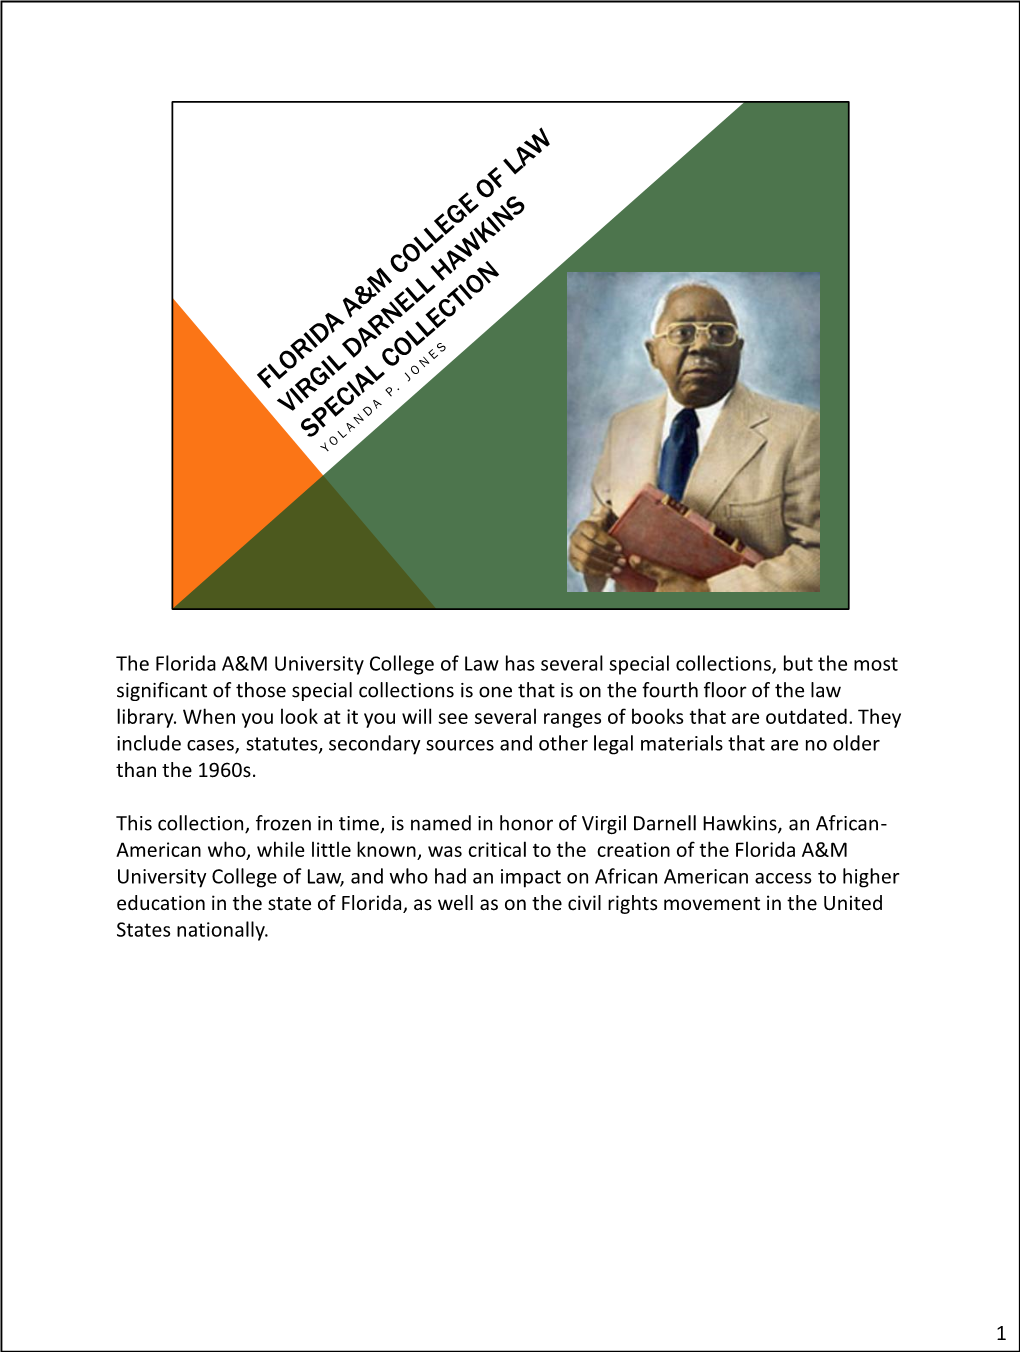 The Florida A&M University College of Law Has Several Special Collections